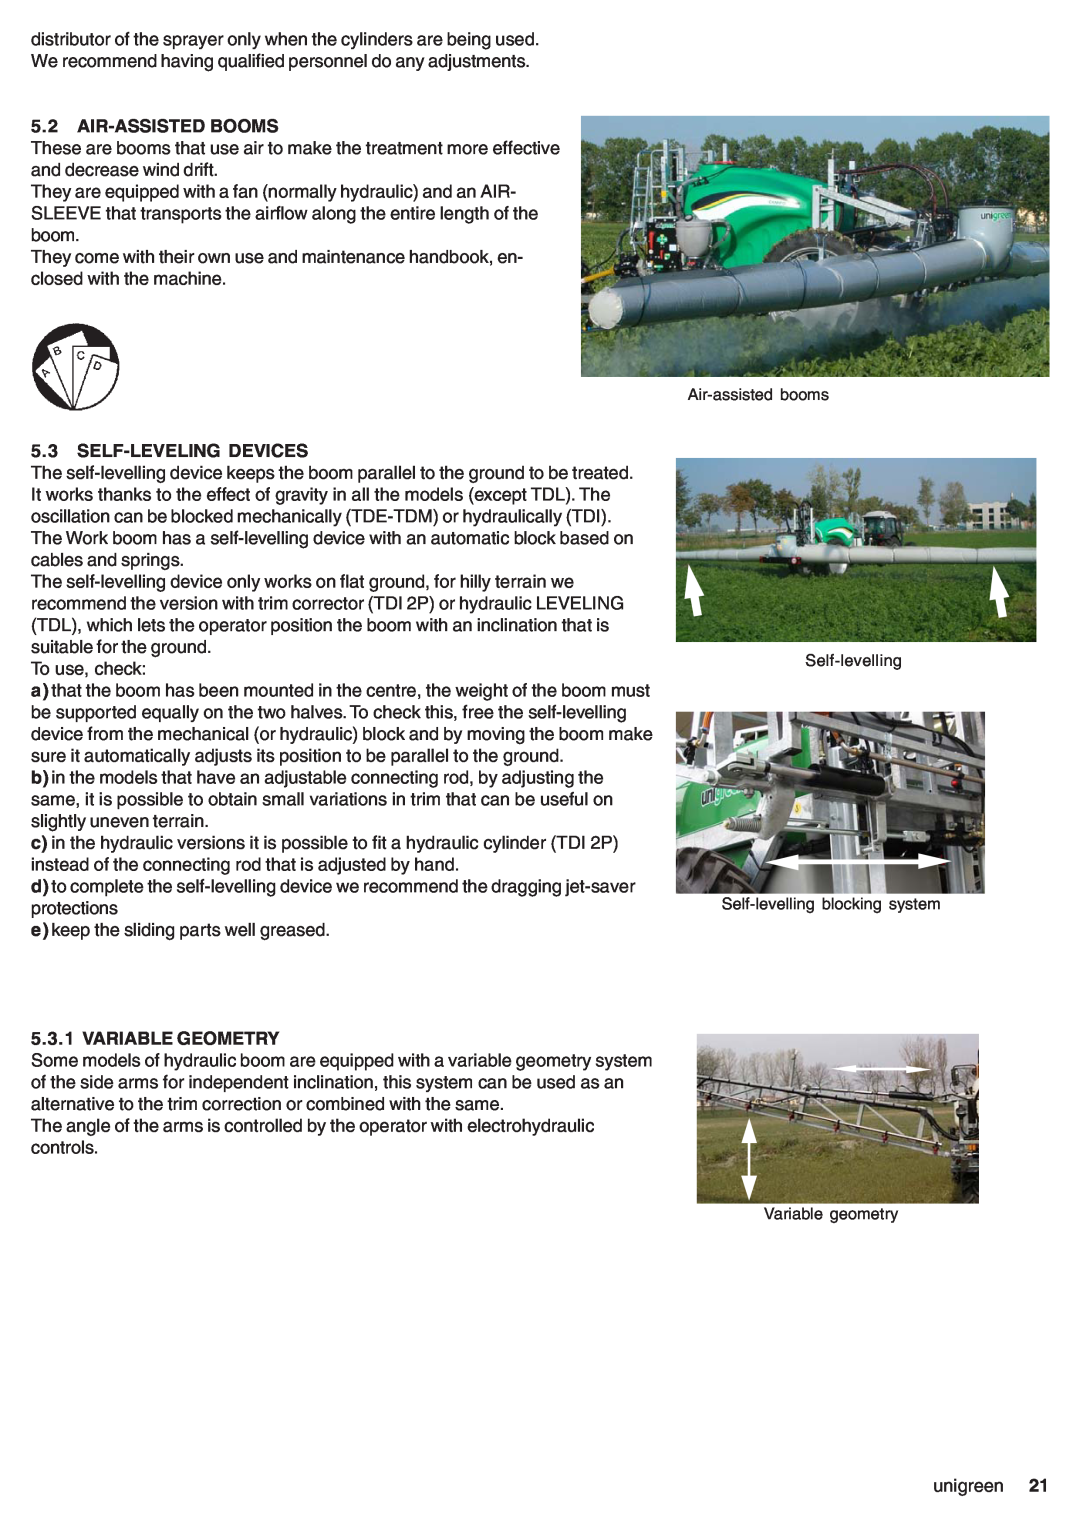 Unigreen CAMPO 11 - 16 - 22 - 32 manual Air-Assisted Booms, Self-Leveling Devices, Variable Geometry, Air-assisted booms 